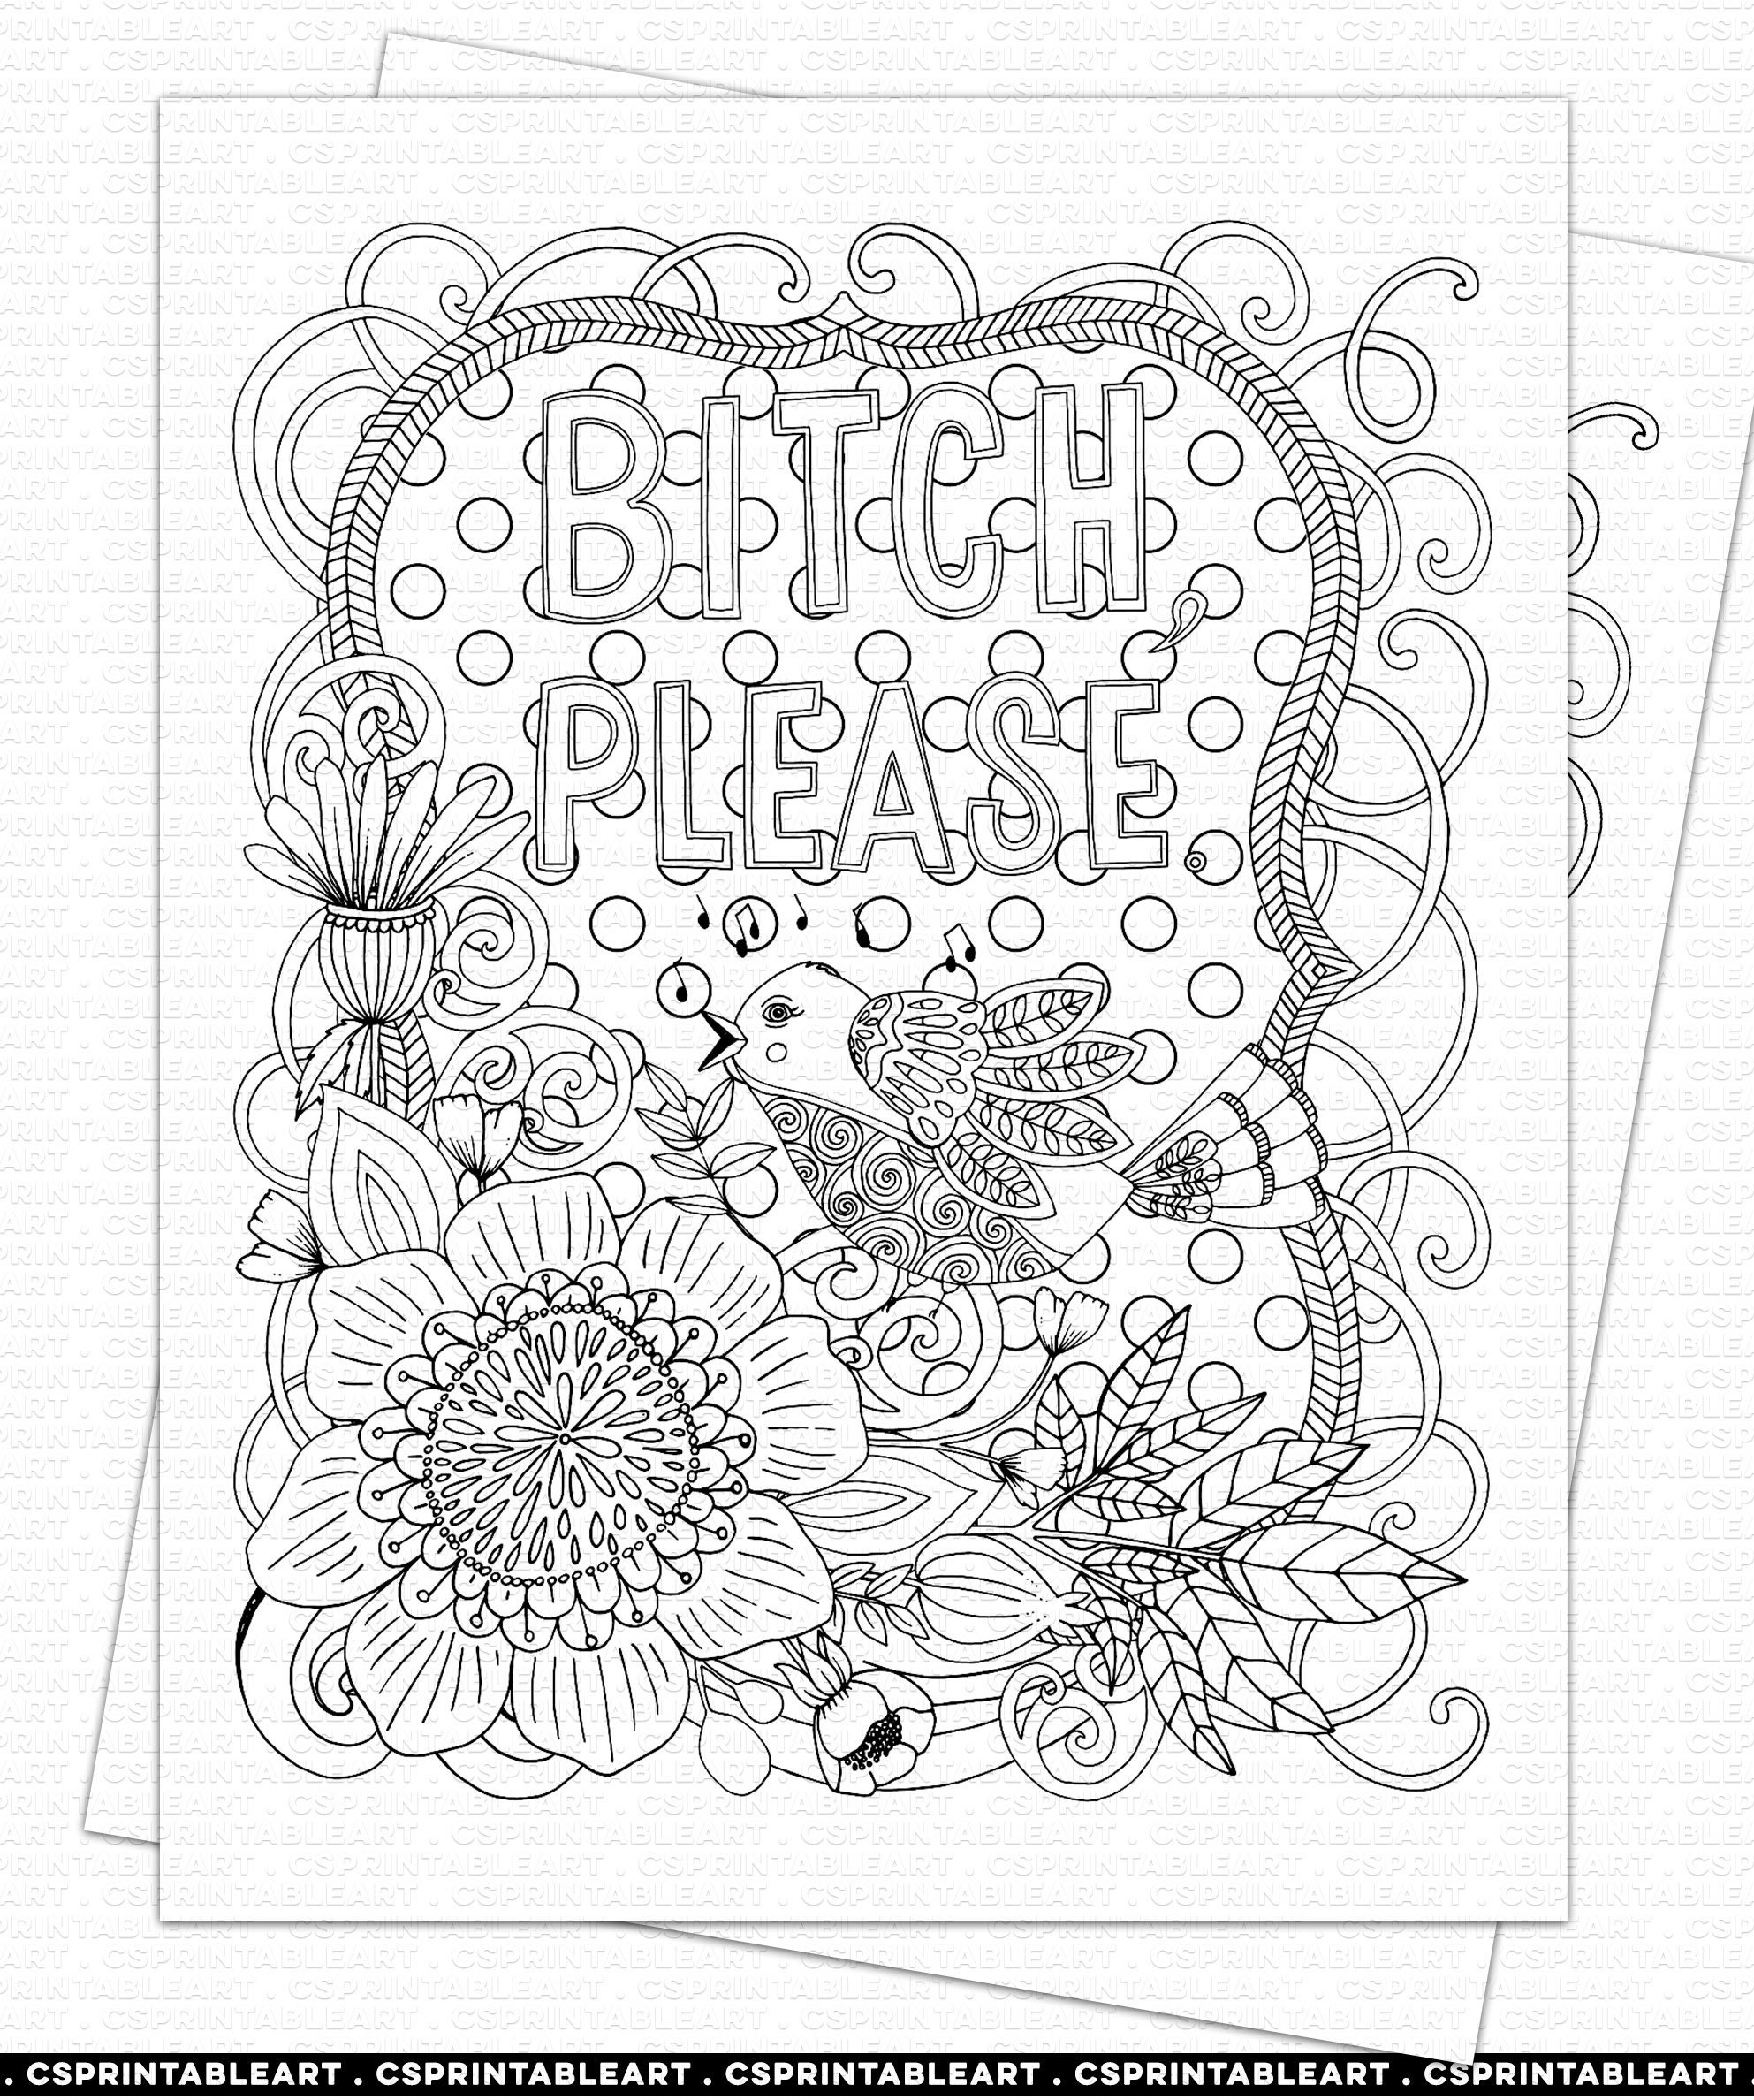 Punch Anxiety In The Face:: An Anti-Anxiety Swearing Coloring Book for –  BookBaniaMett